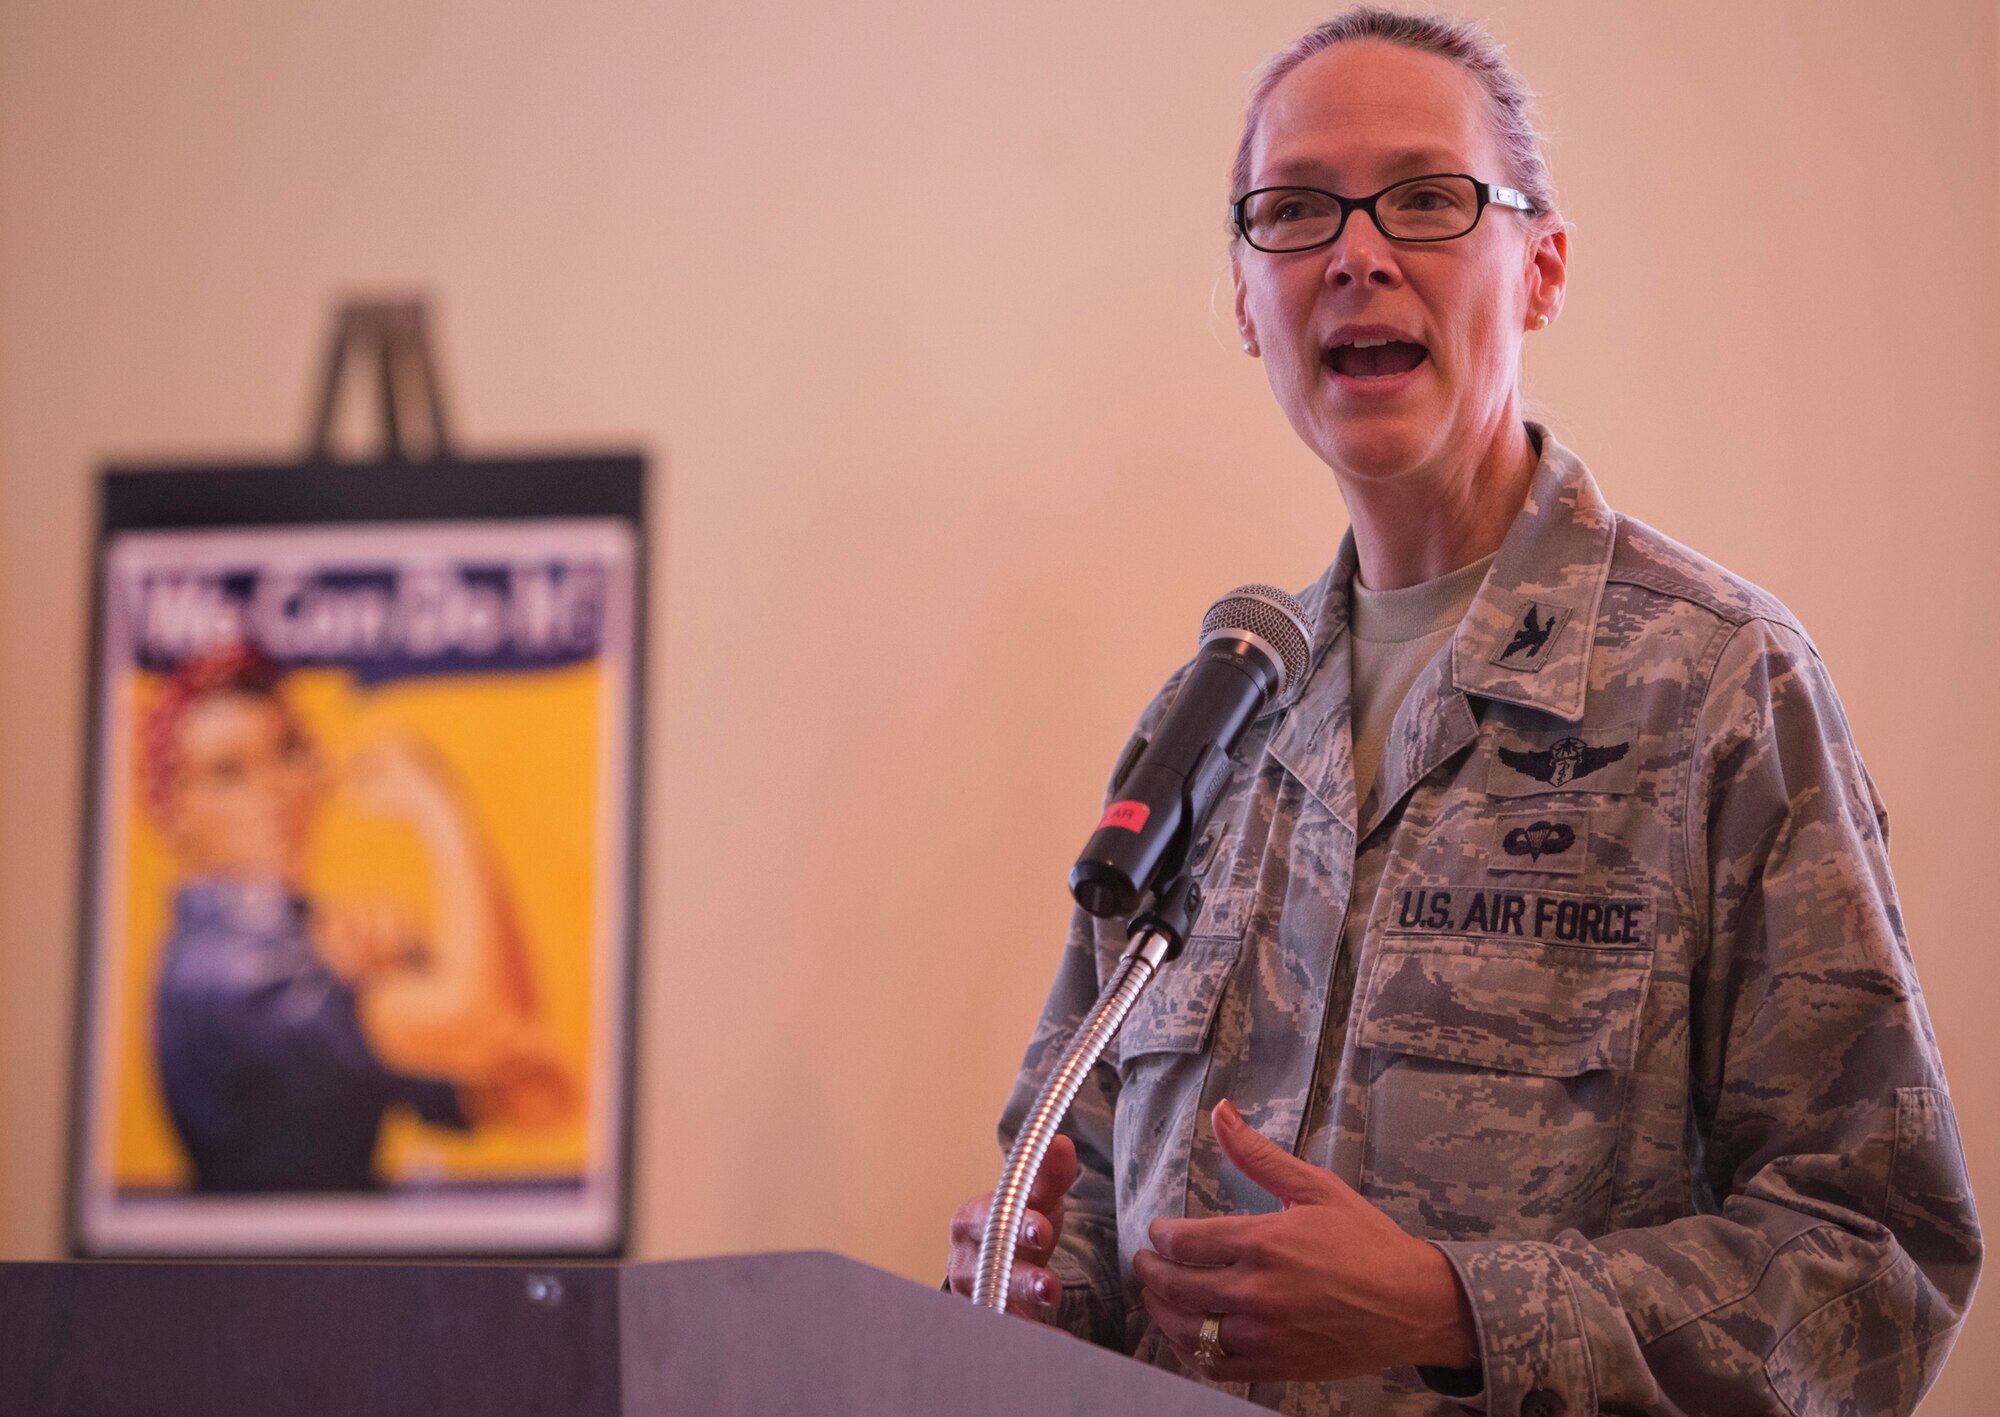 Women's Equality Luncheon at Eglin Air Force Base, Aug. 24.